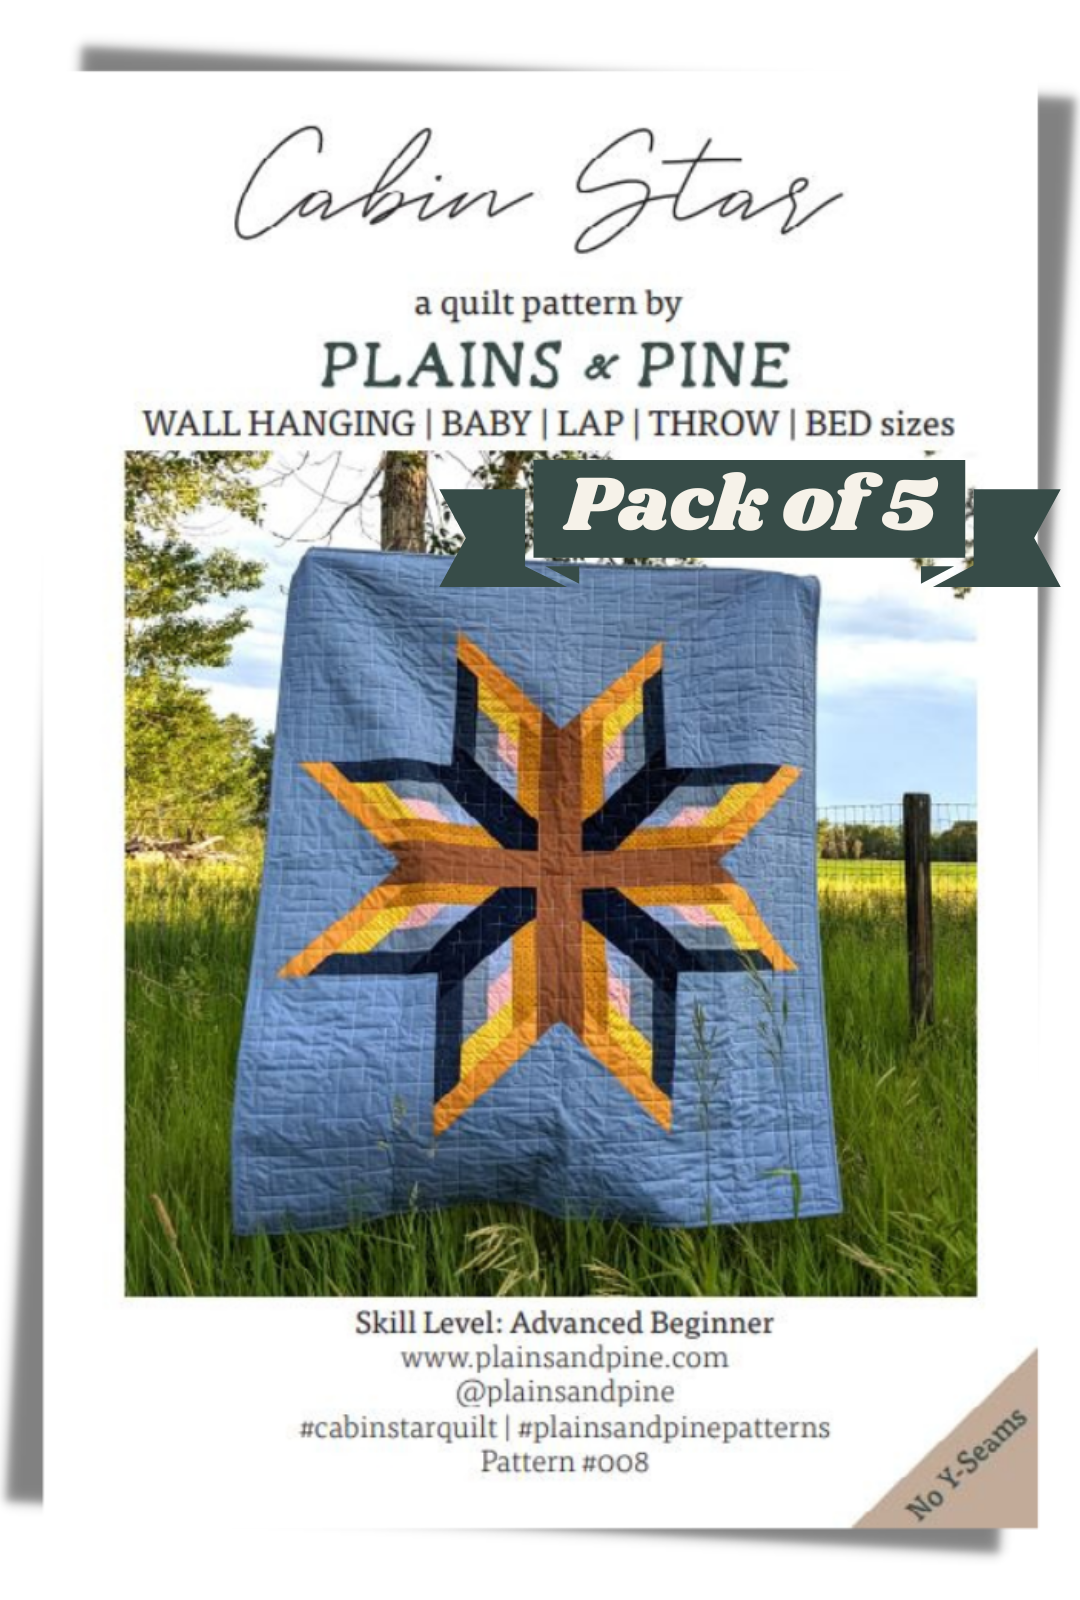 WHOLESALE - Cabin Star Quilt Pattern, Pack of 5 patterns